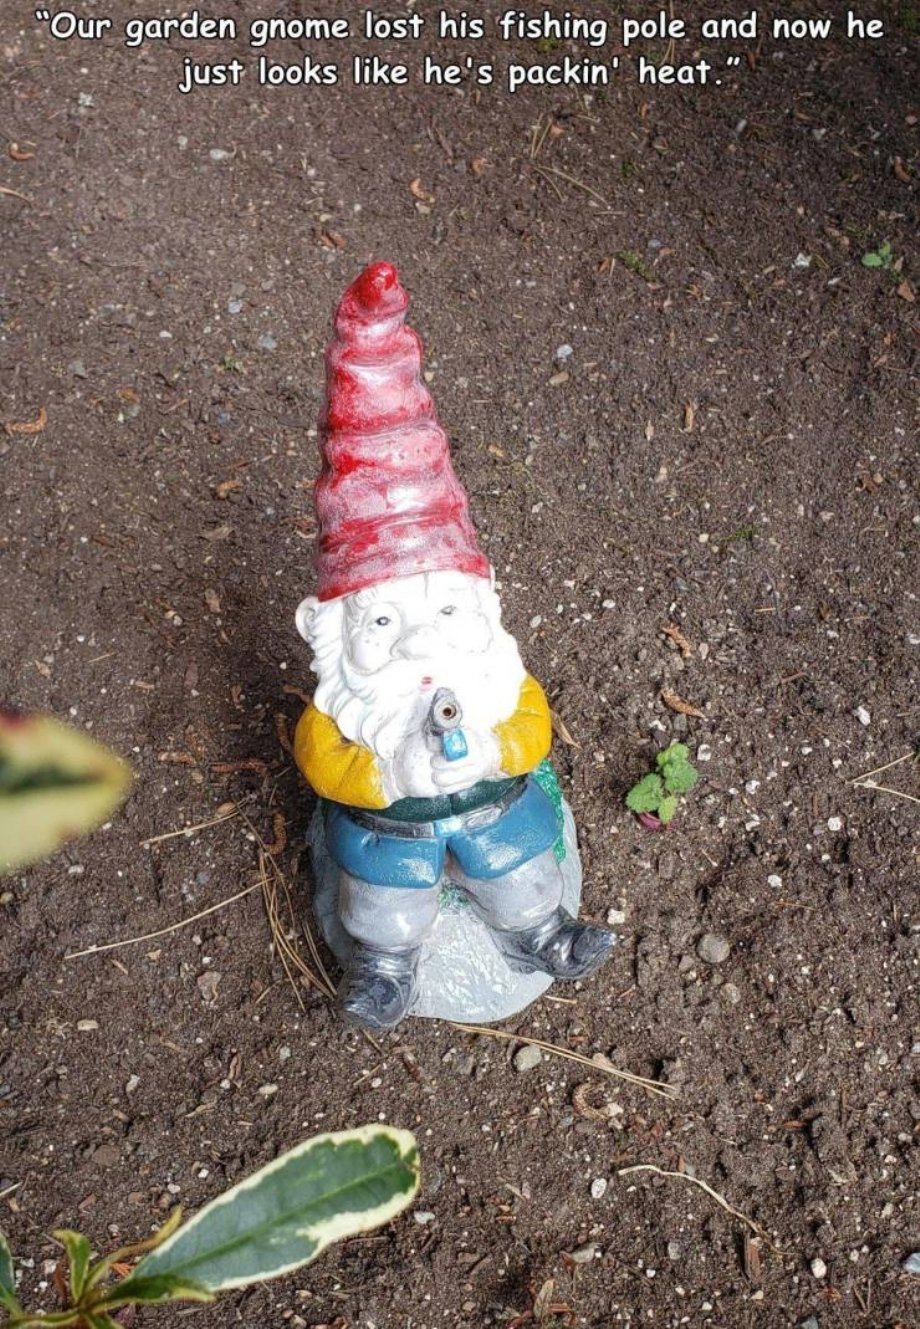 garden gnome - "Our garden gnome. lost his fishing pole and now he just looks he's packin' heat."